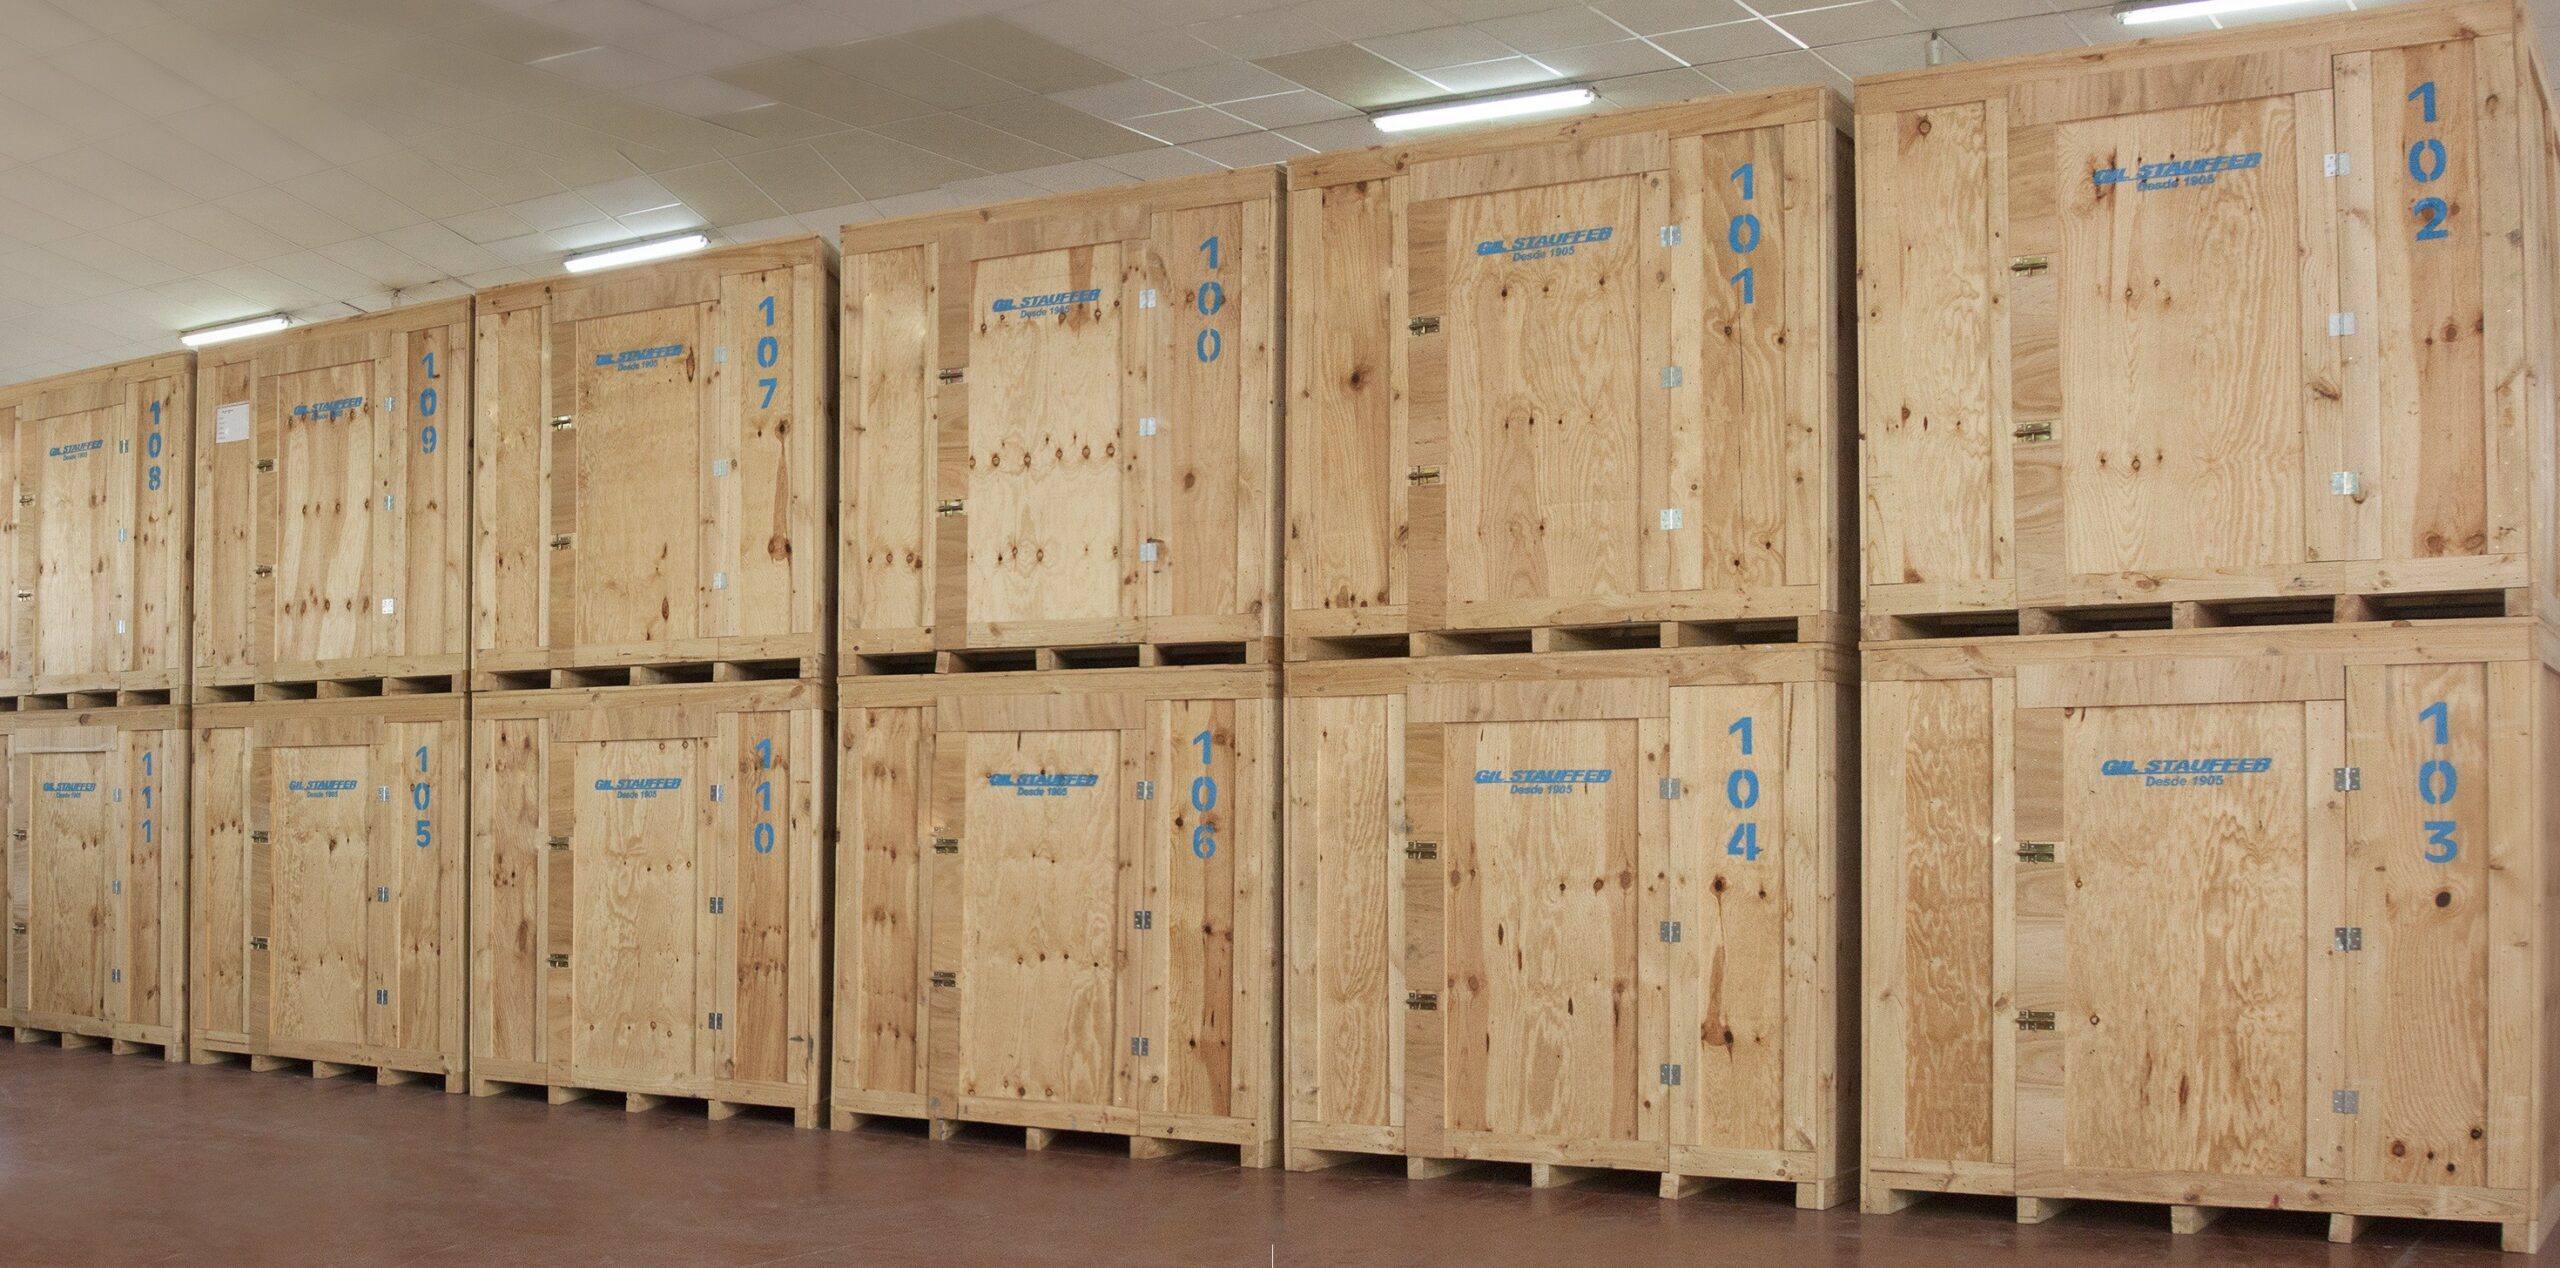 Price of a furniture repository in Tenerife and differences compared to storage rooms